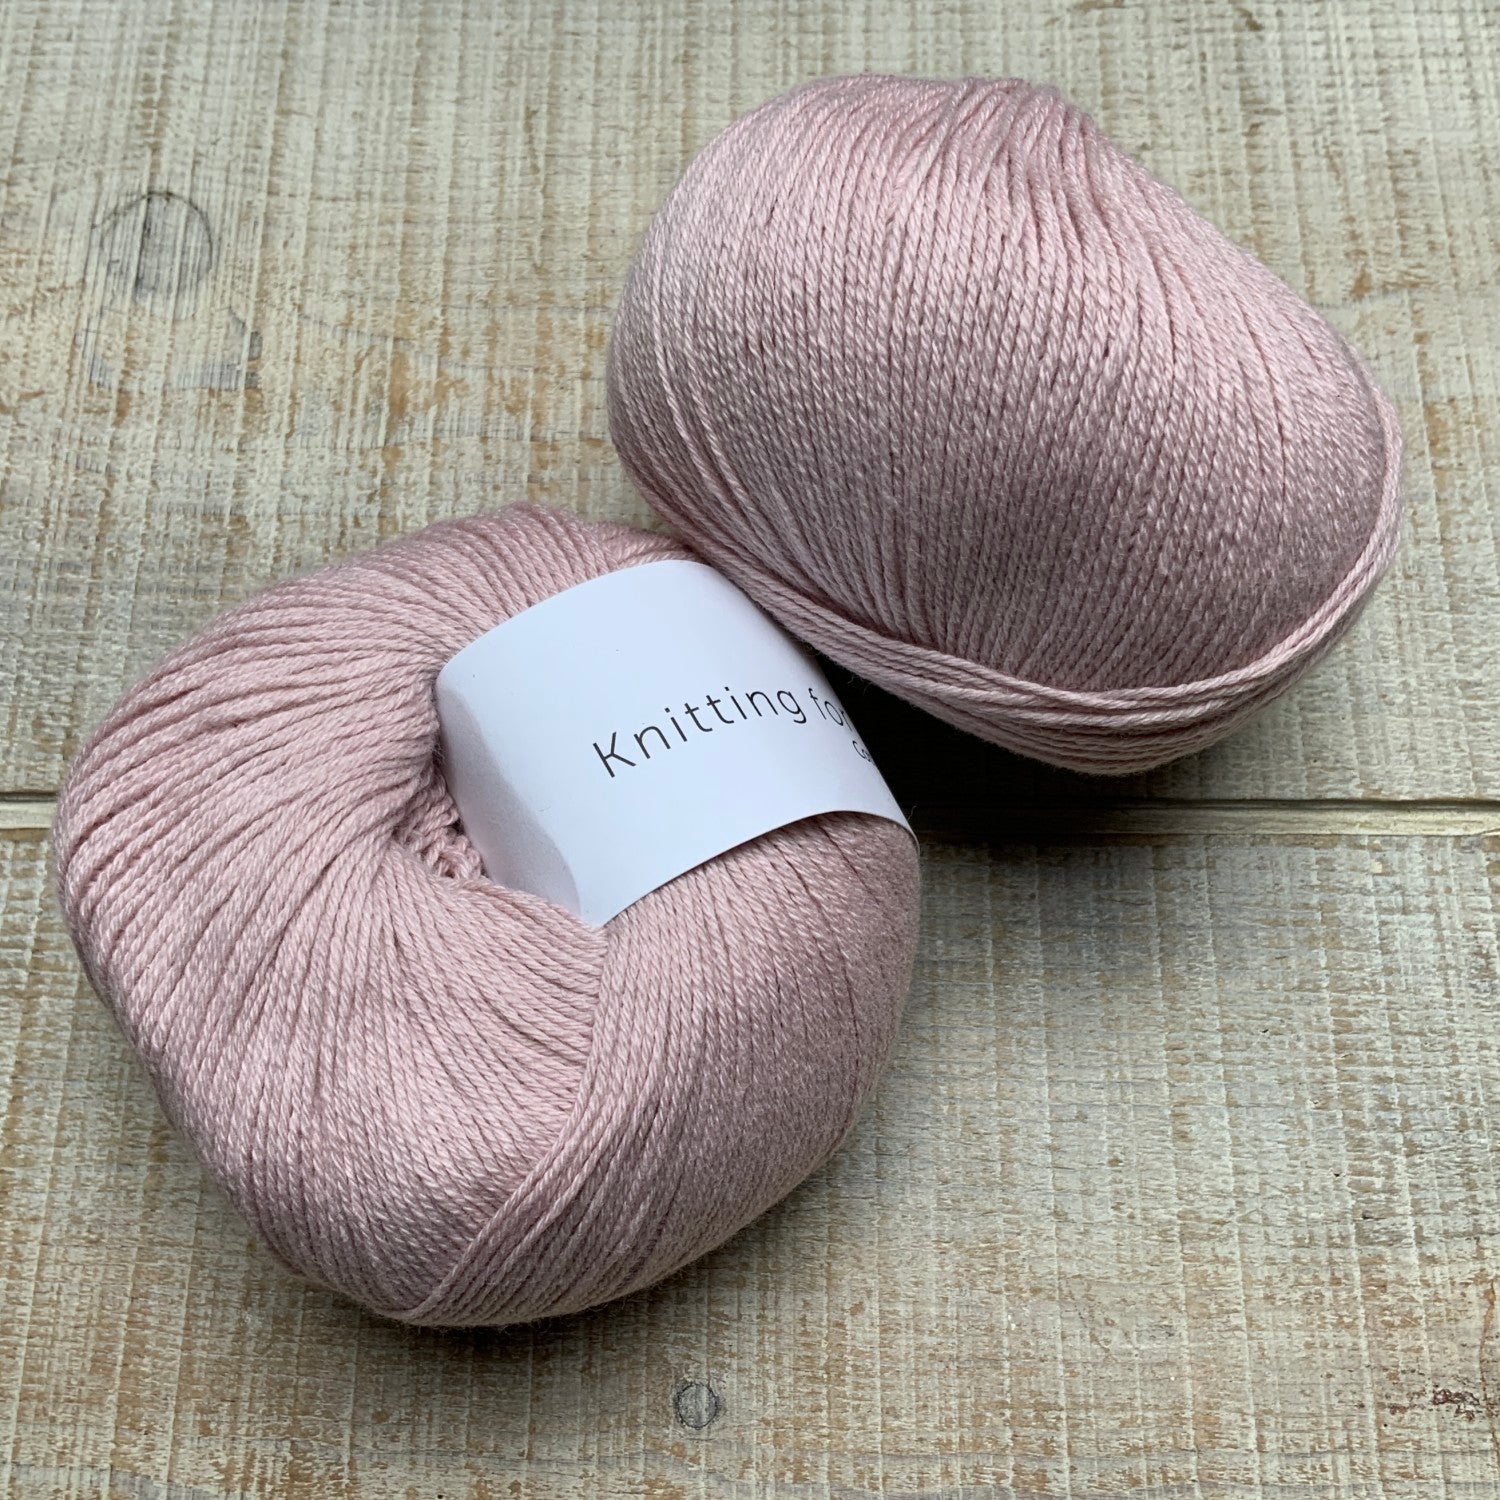 Knitting for Olive Pure Silk - Cream –